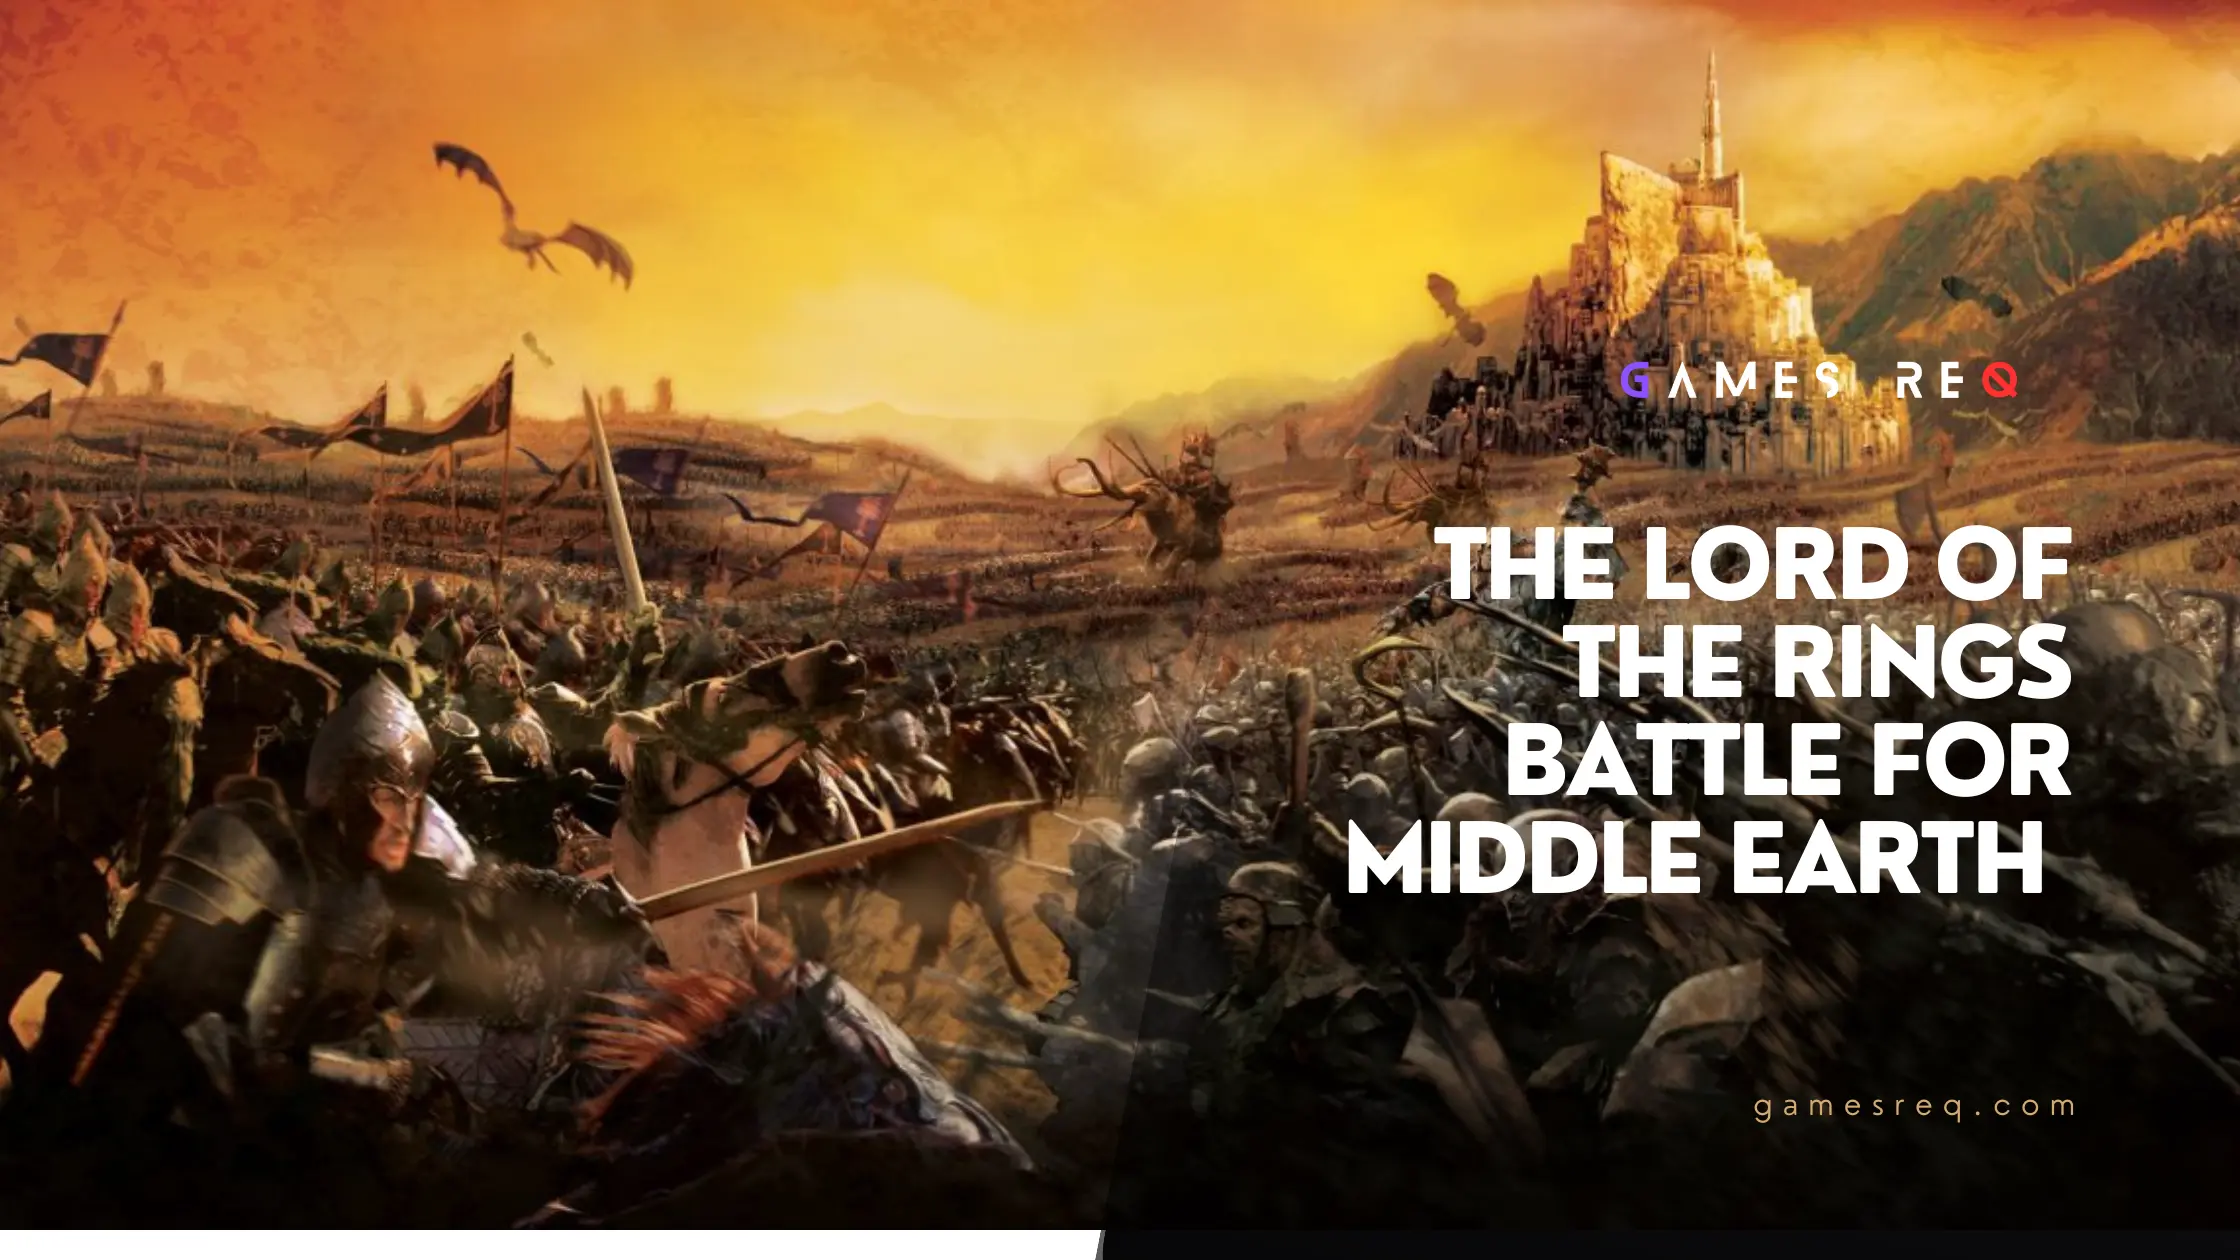 The Lord Of the rings battle for middle earth An Epic RTS Based on the Films